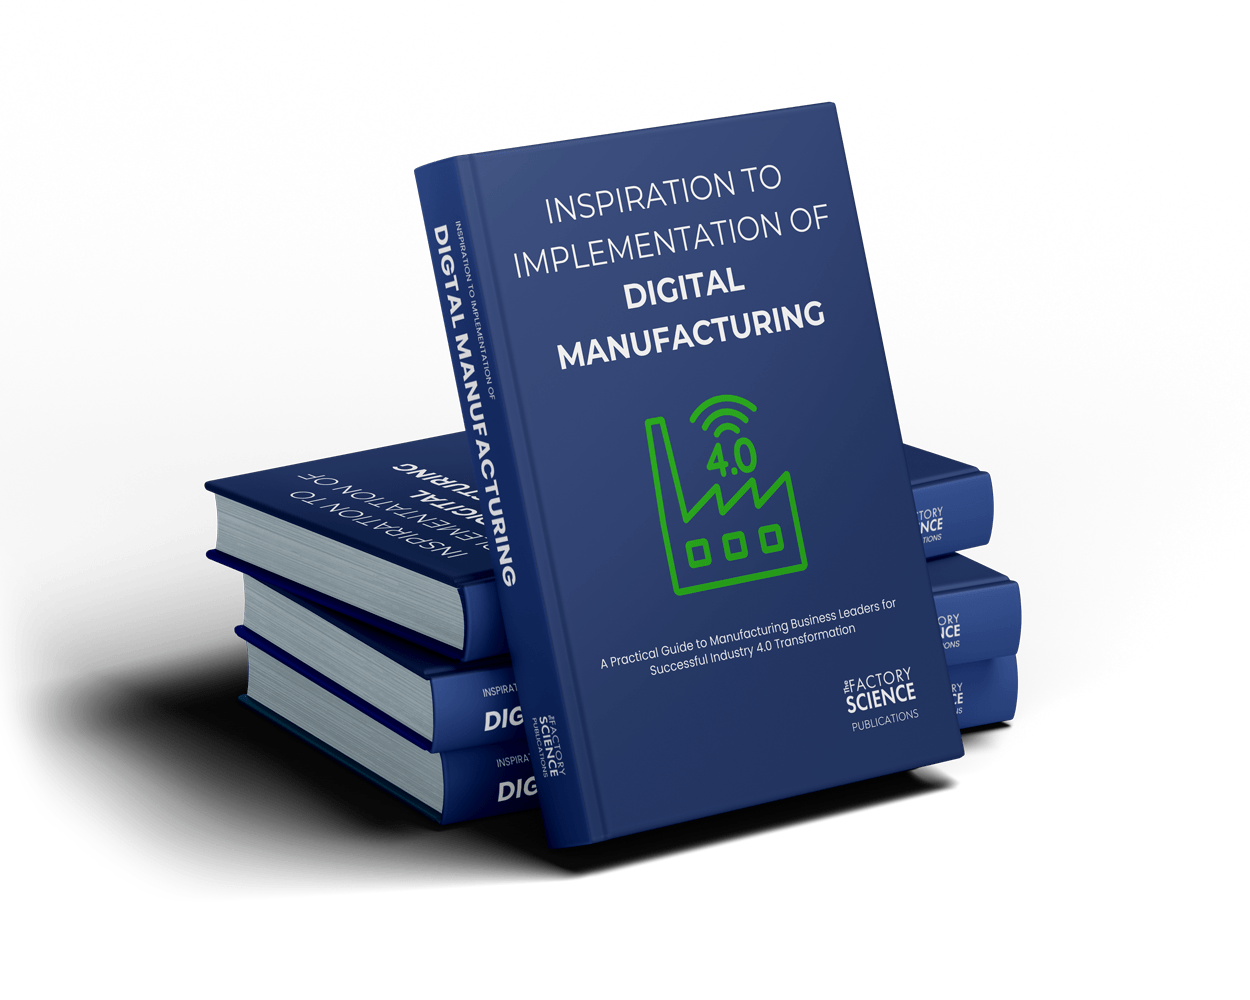 Inspiration to Implementation of Digital Manufacturing